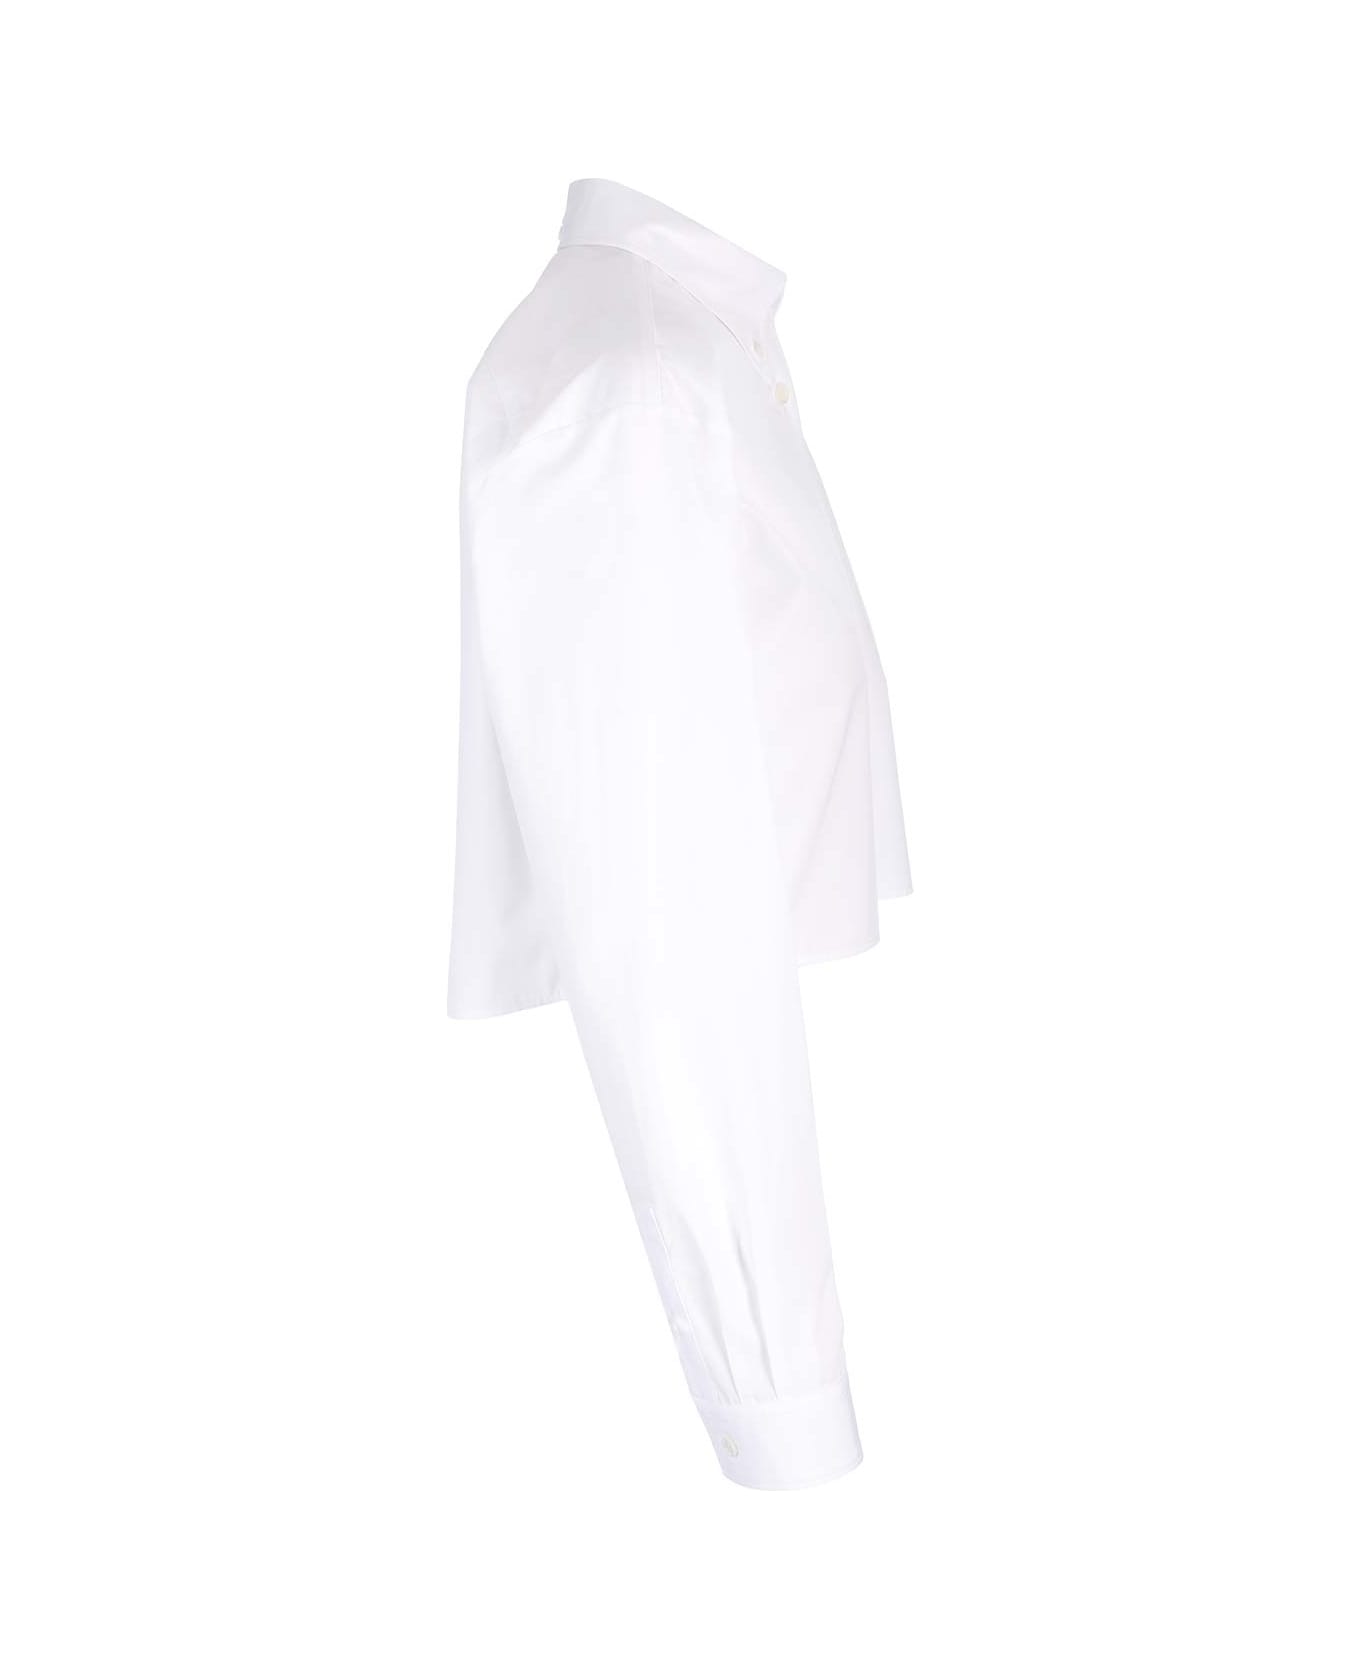 Givenchy '4g' Cropped Shirt - White